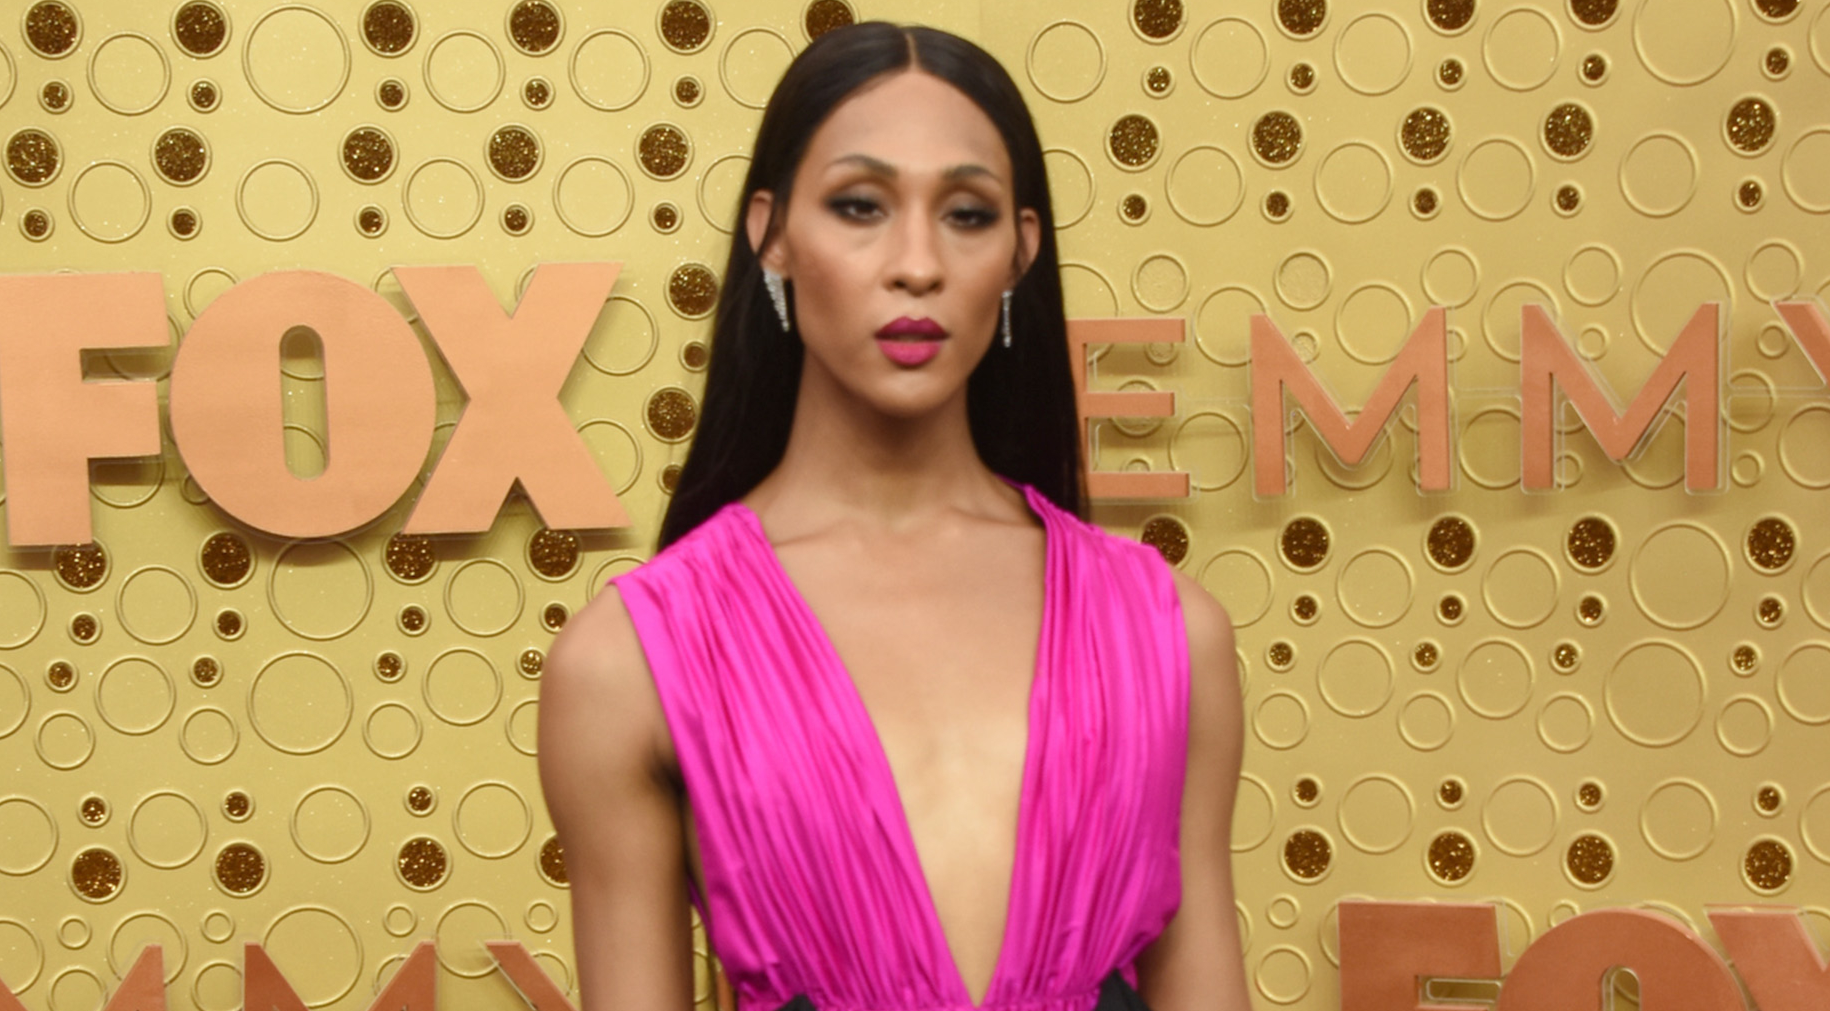 Mj Rodriguez at the Primetime Emmy Awards - Arrivals at the Microsoft Theater on September 22, 2019 in Los Angeles, CA.